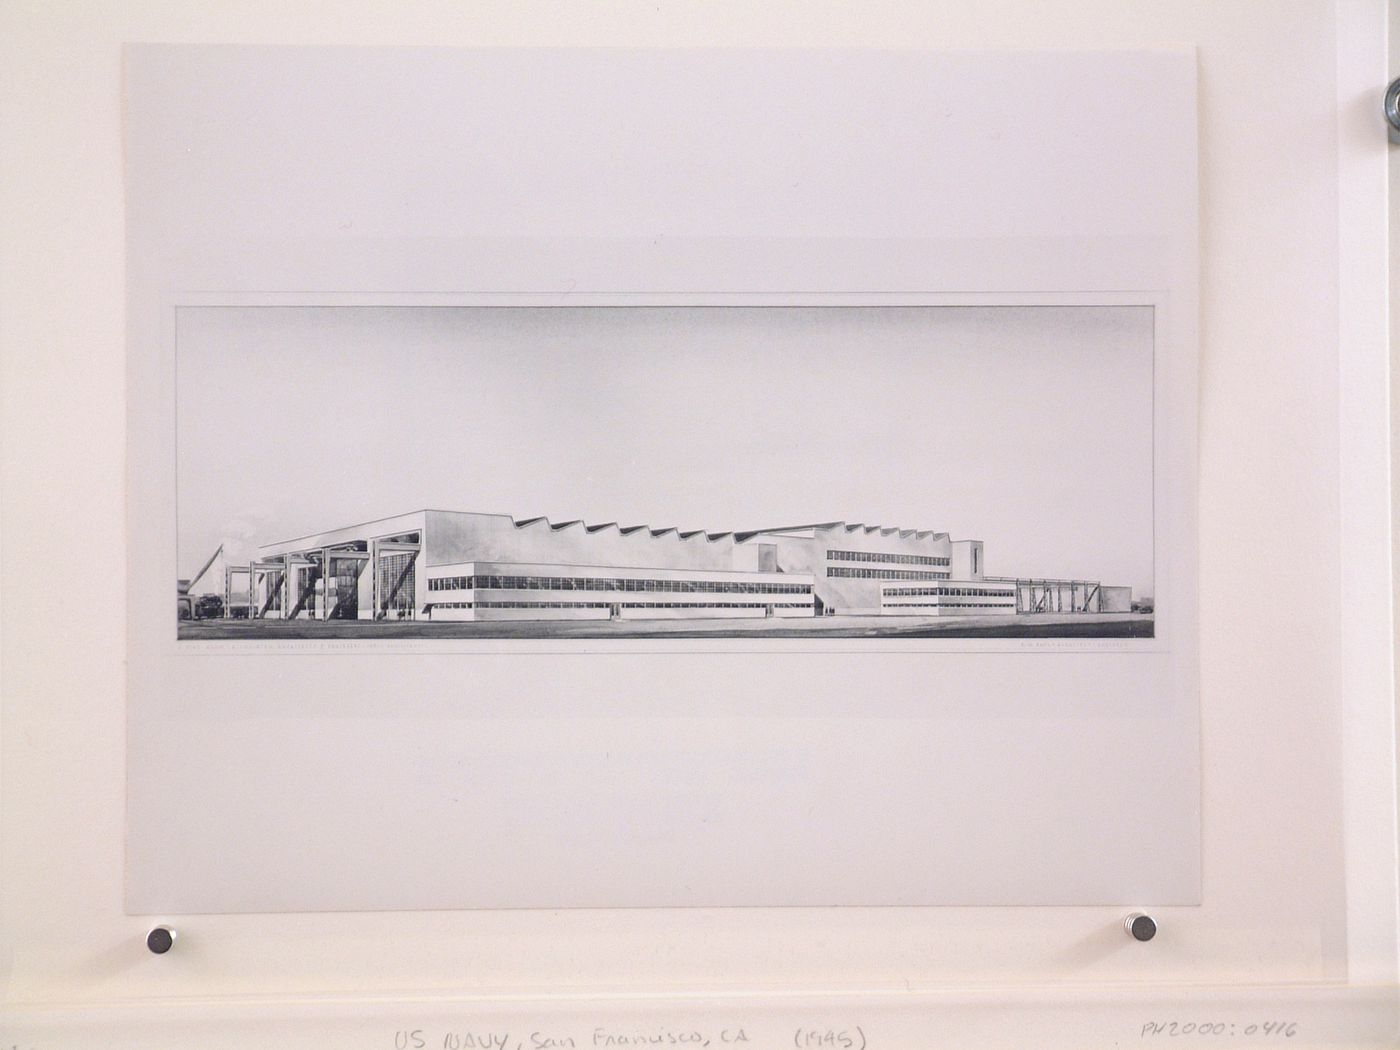 Photograph of a perspective drawing for or of the Shipfitters' Shop, United States Naval Air Base, Hunter's Point, San Francisco, California